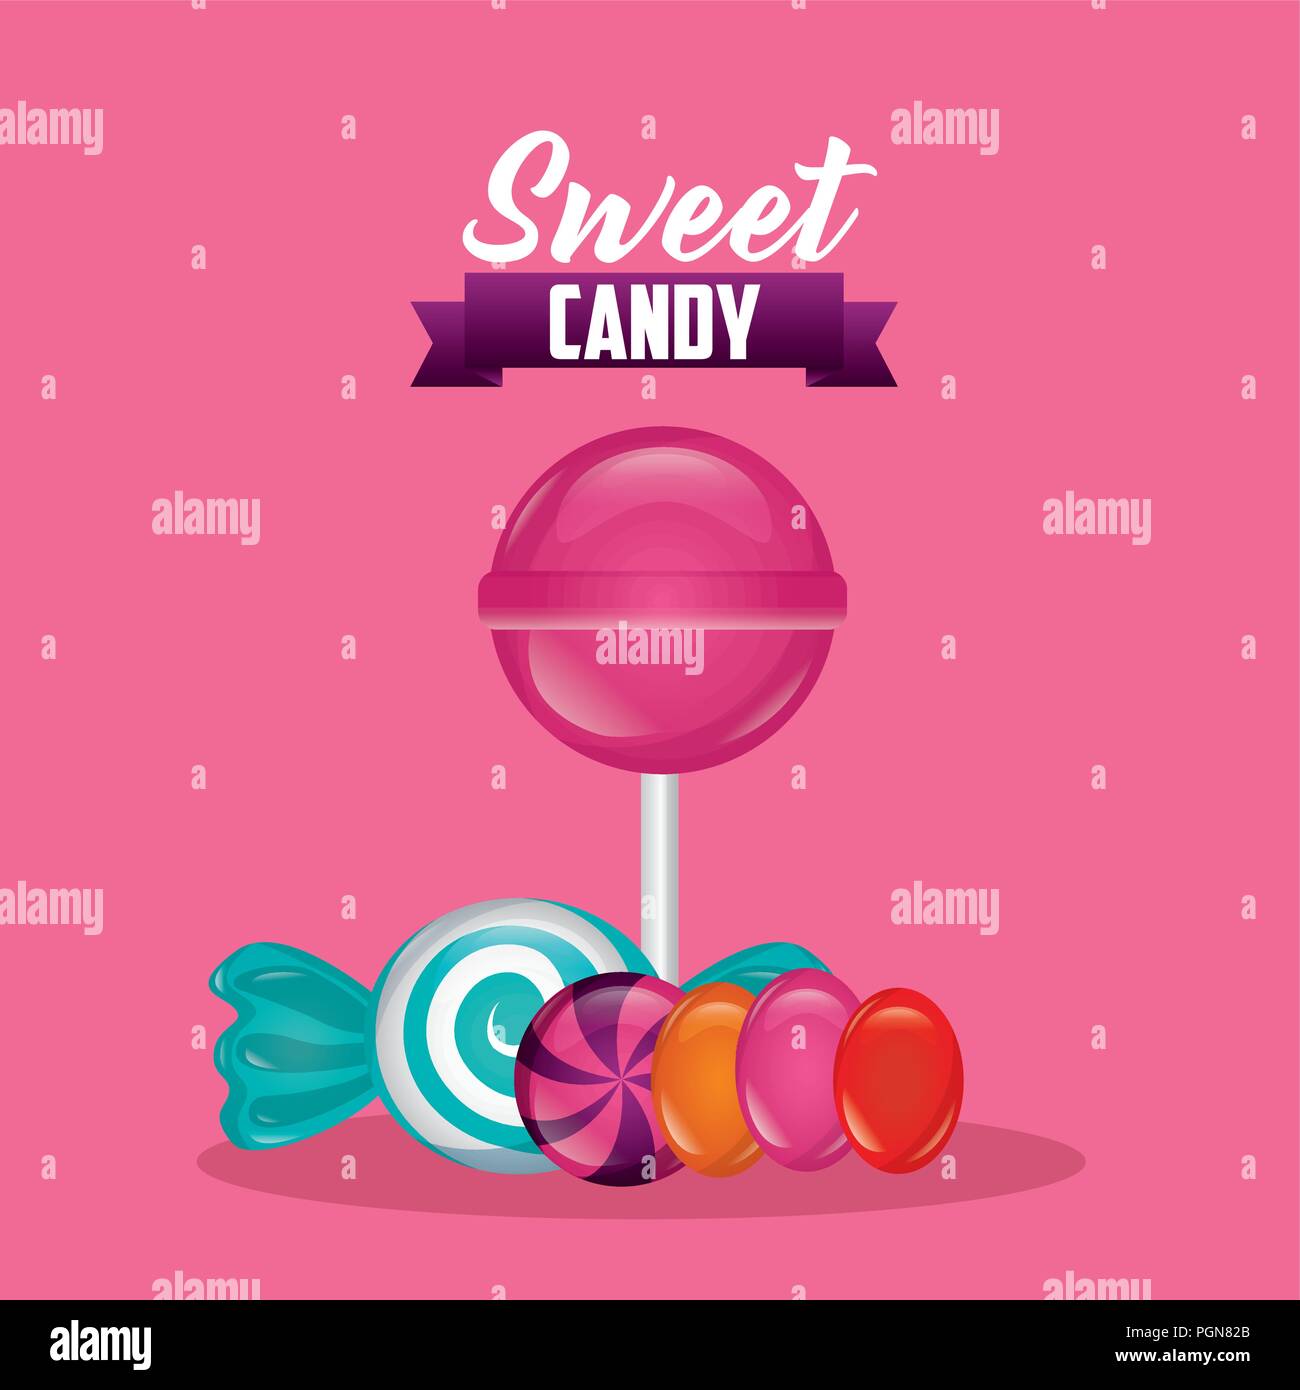 sweet candy concept Stock Vector